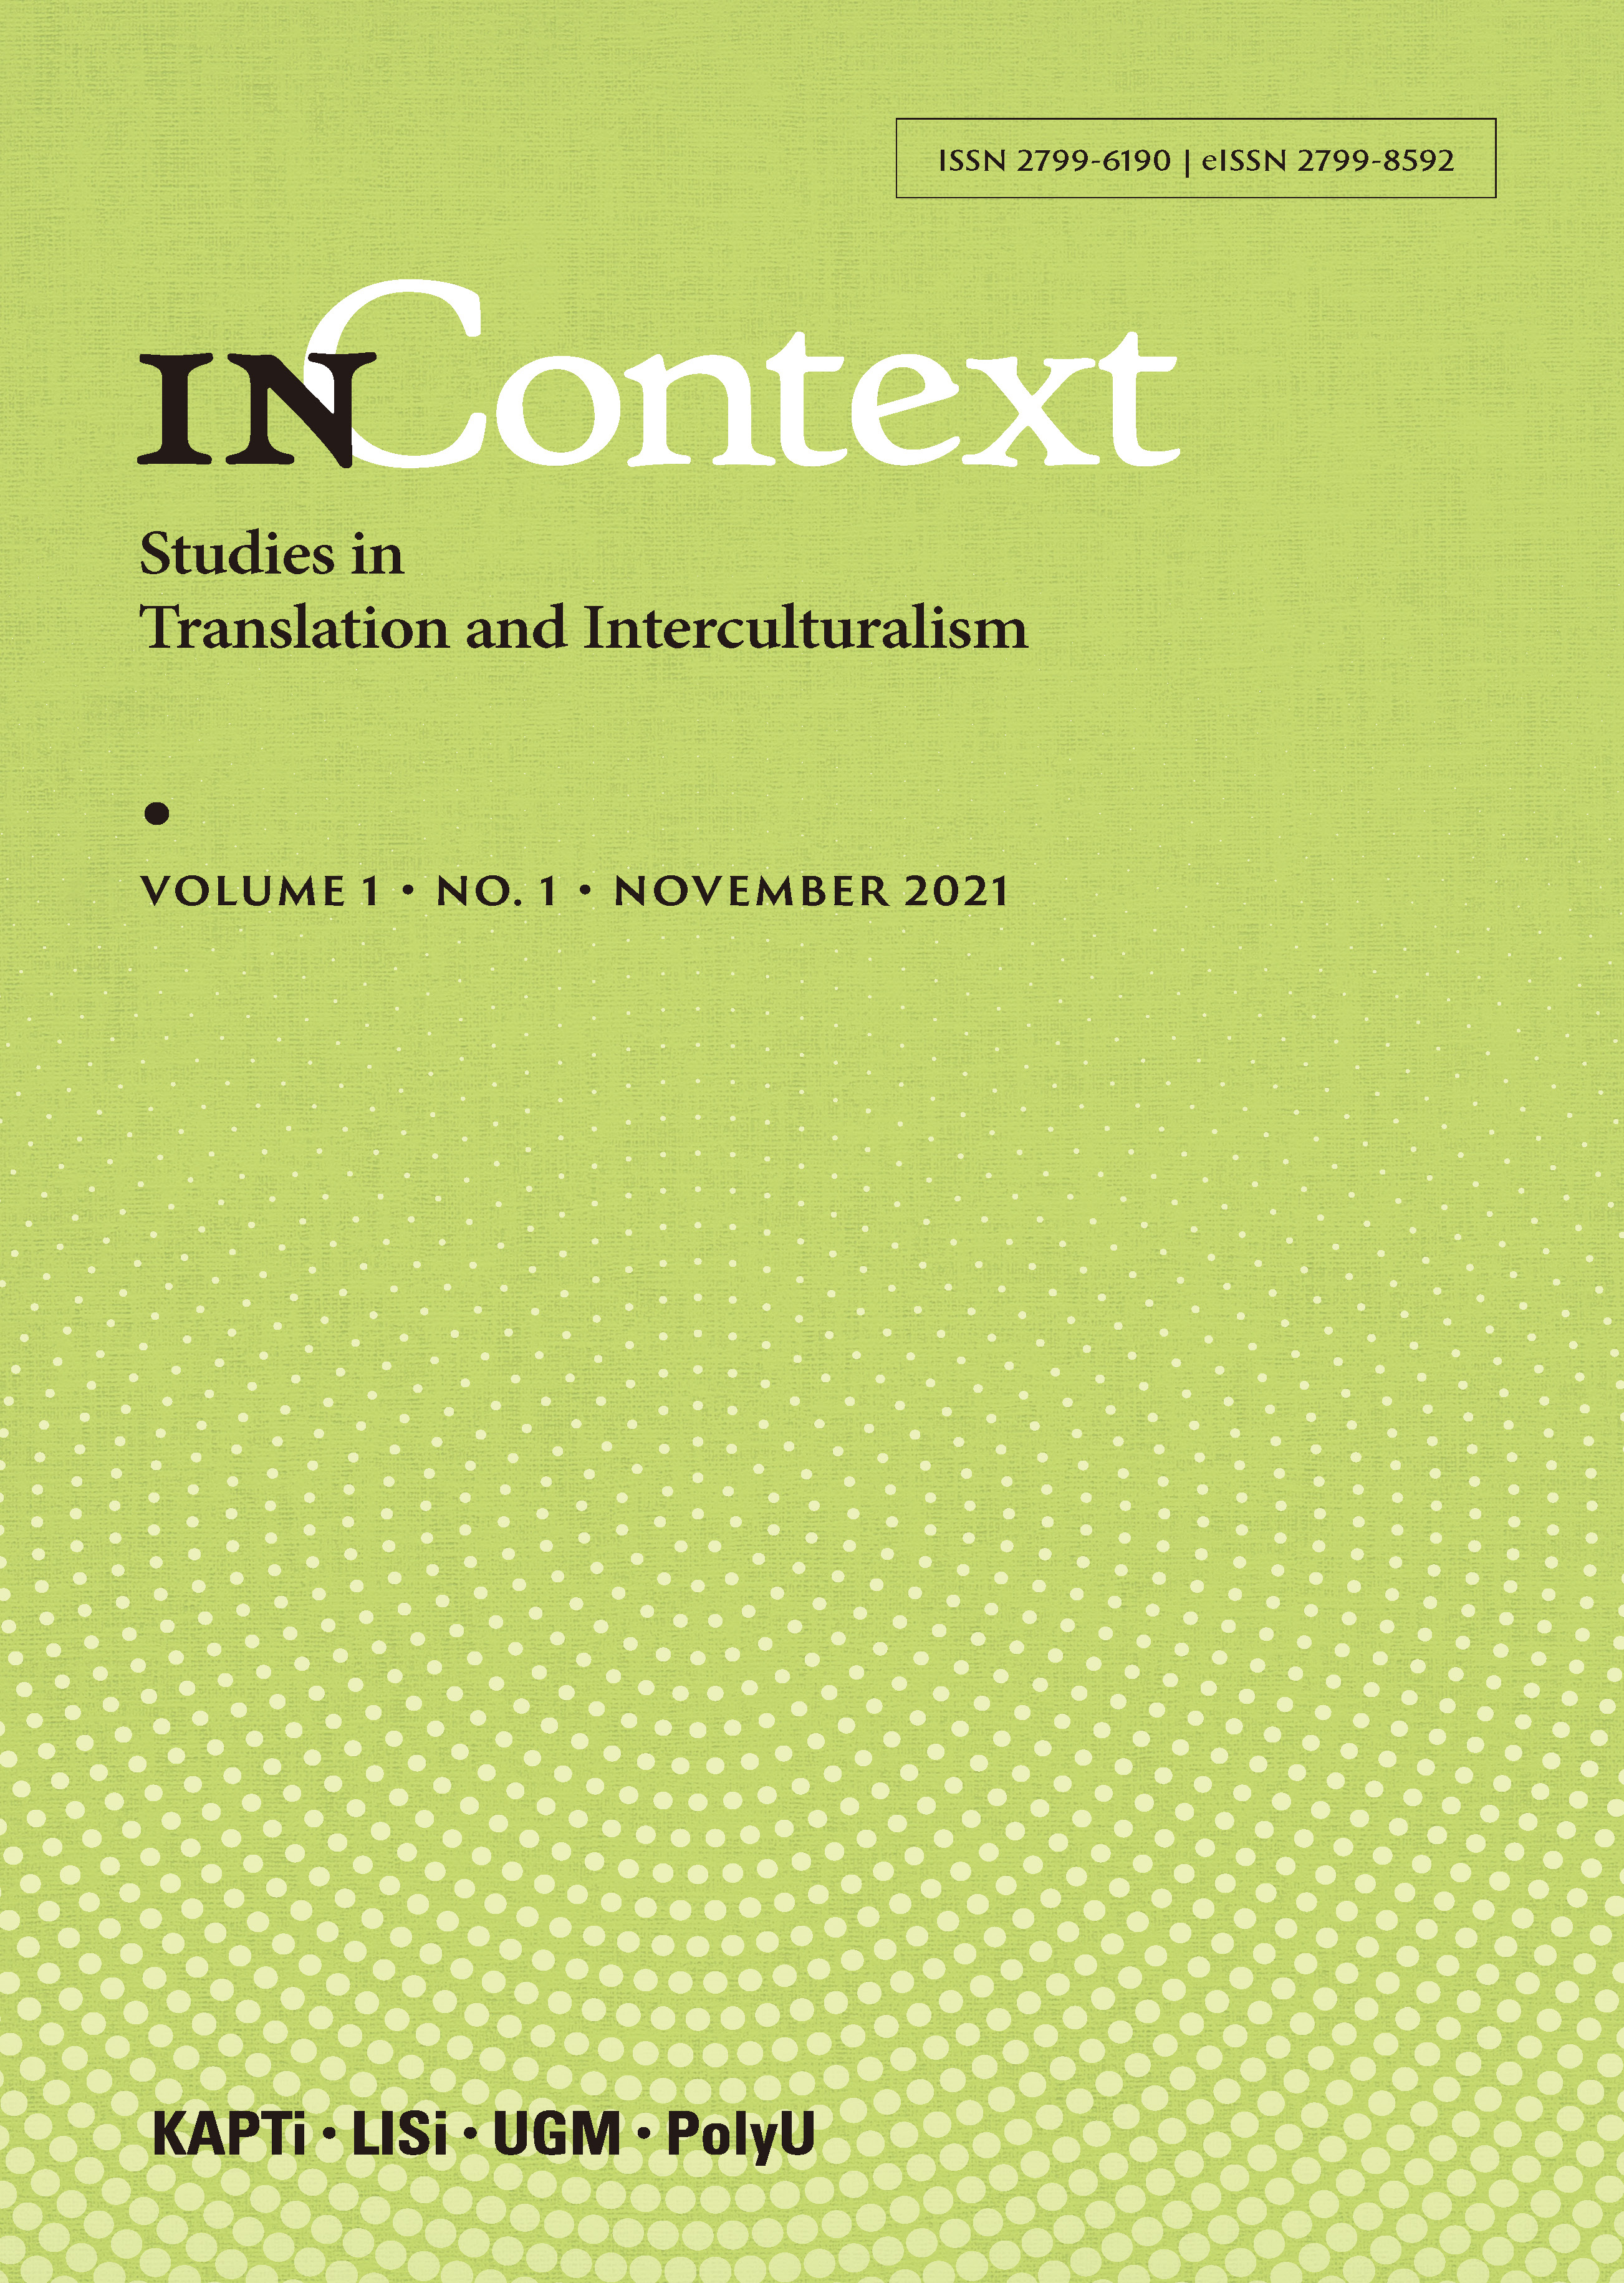 Front cover of INContext Volume 1, No. 1, published in November 2021.